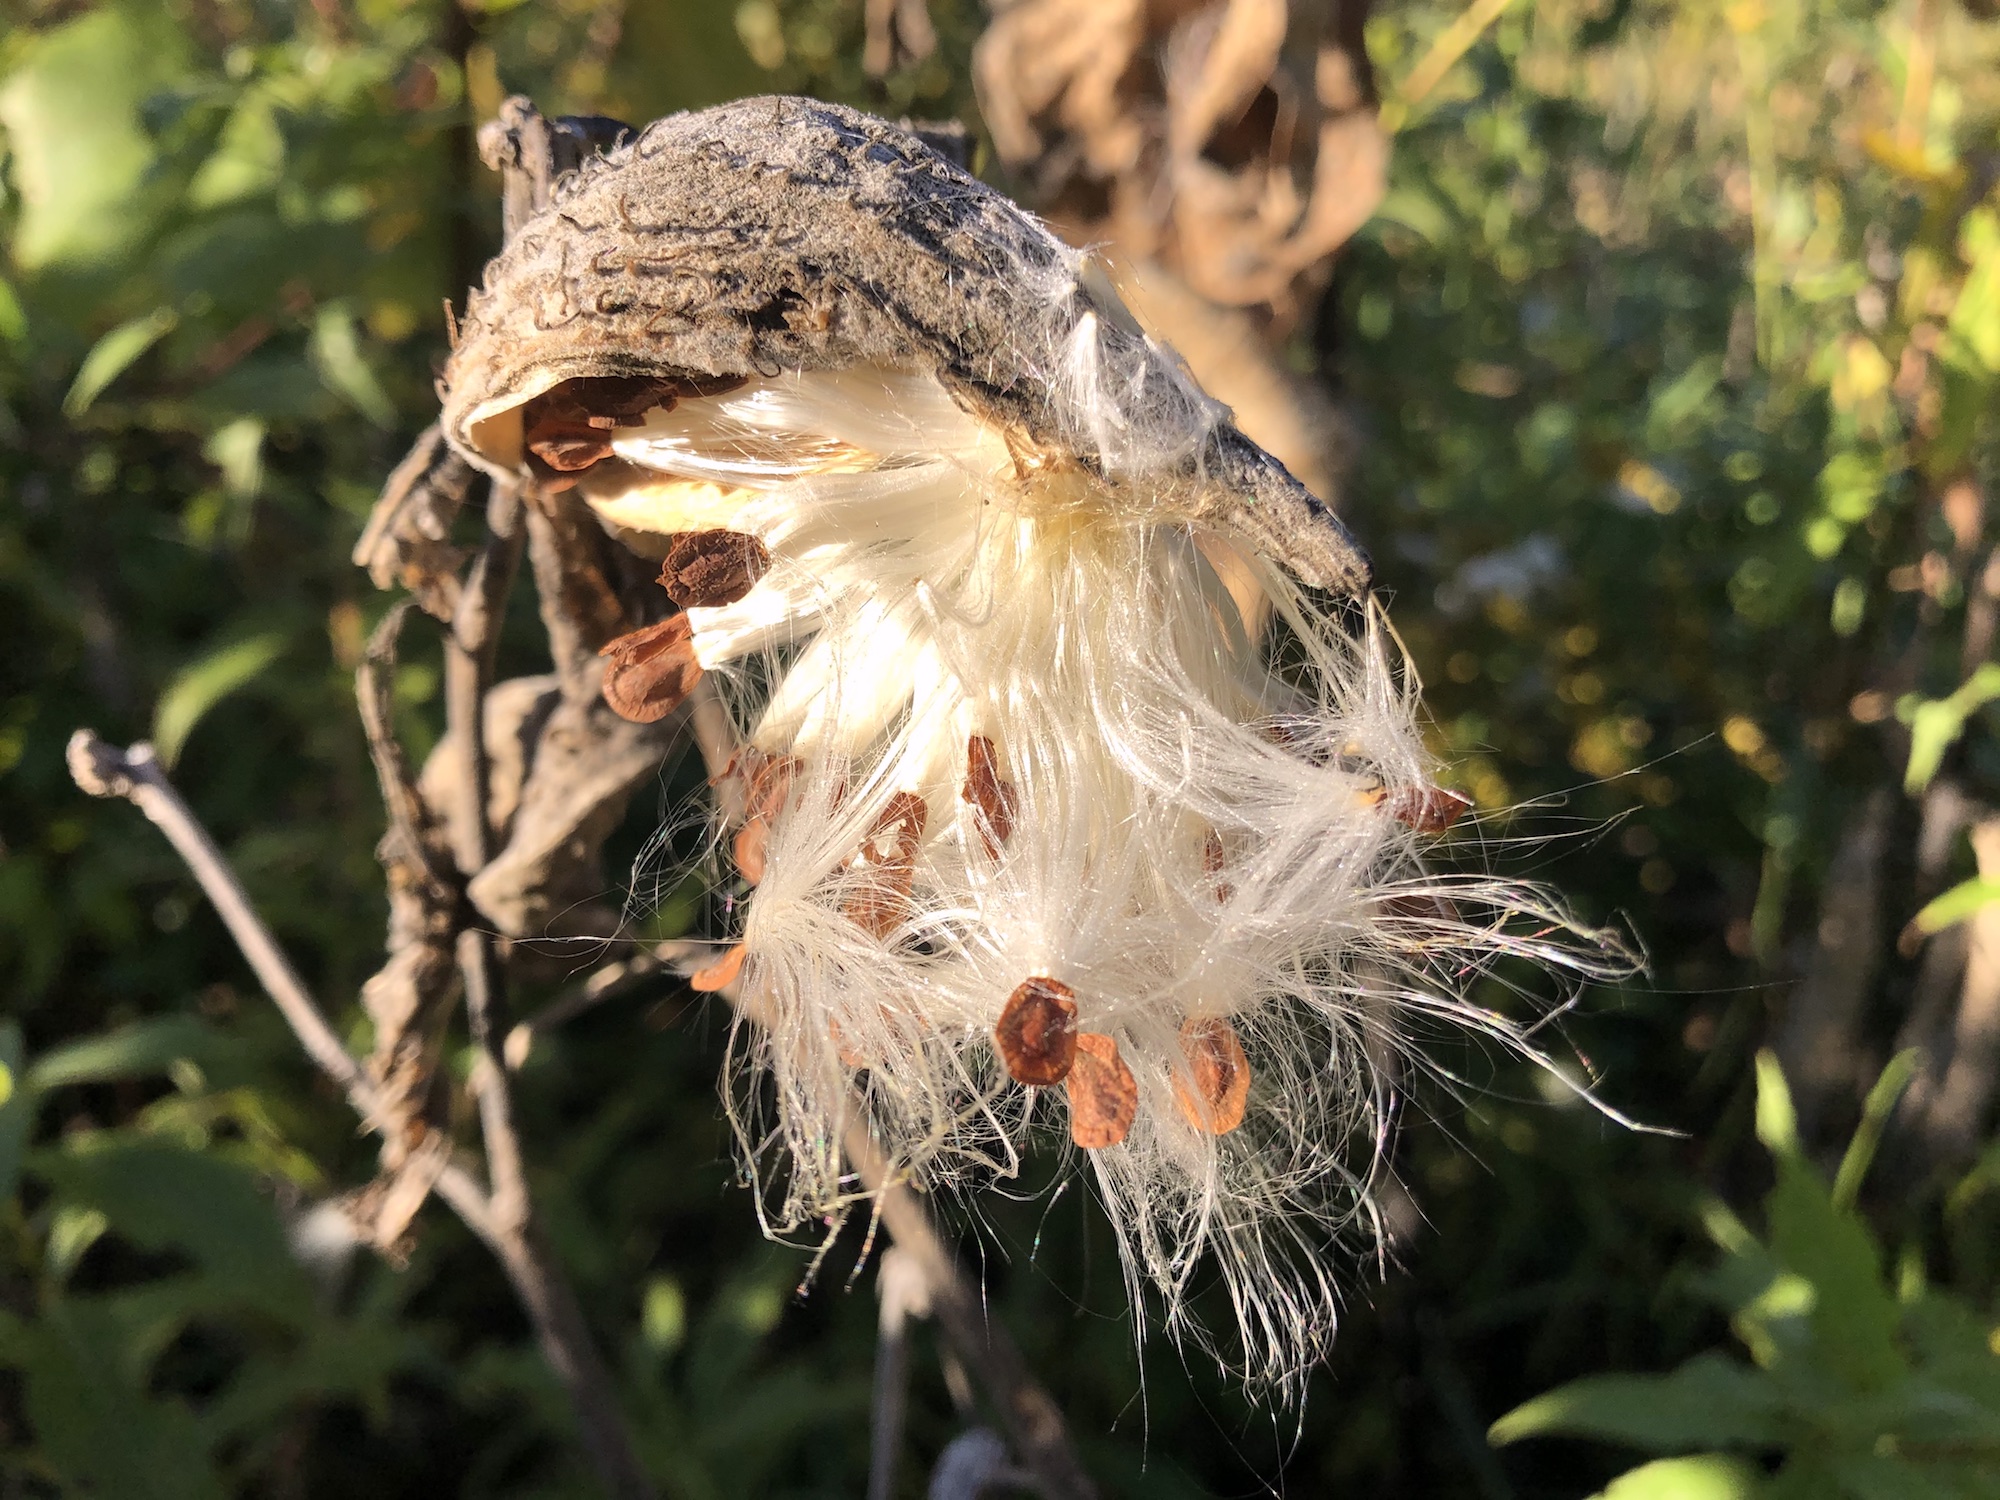 Common Milkweed on shore of Marion Dunn Pond on October 2, 2020.